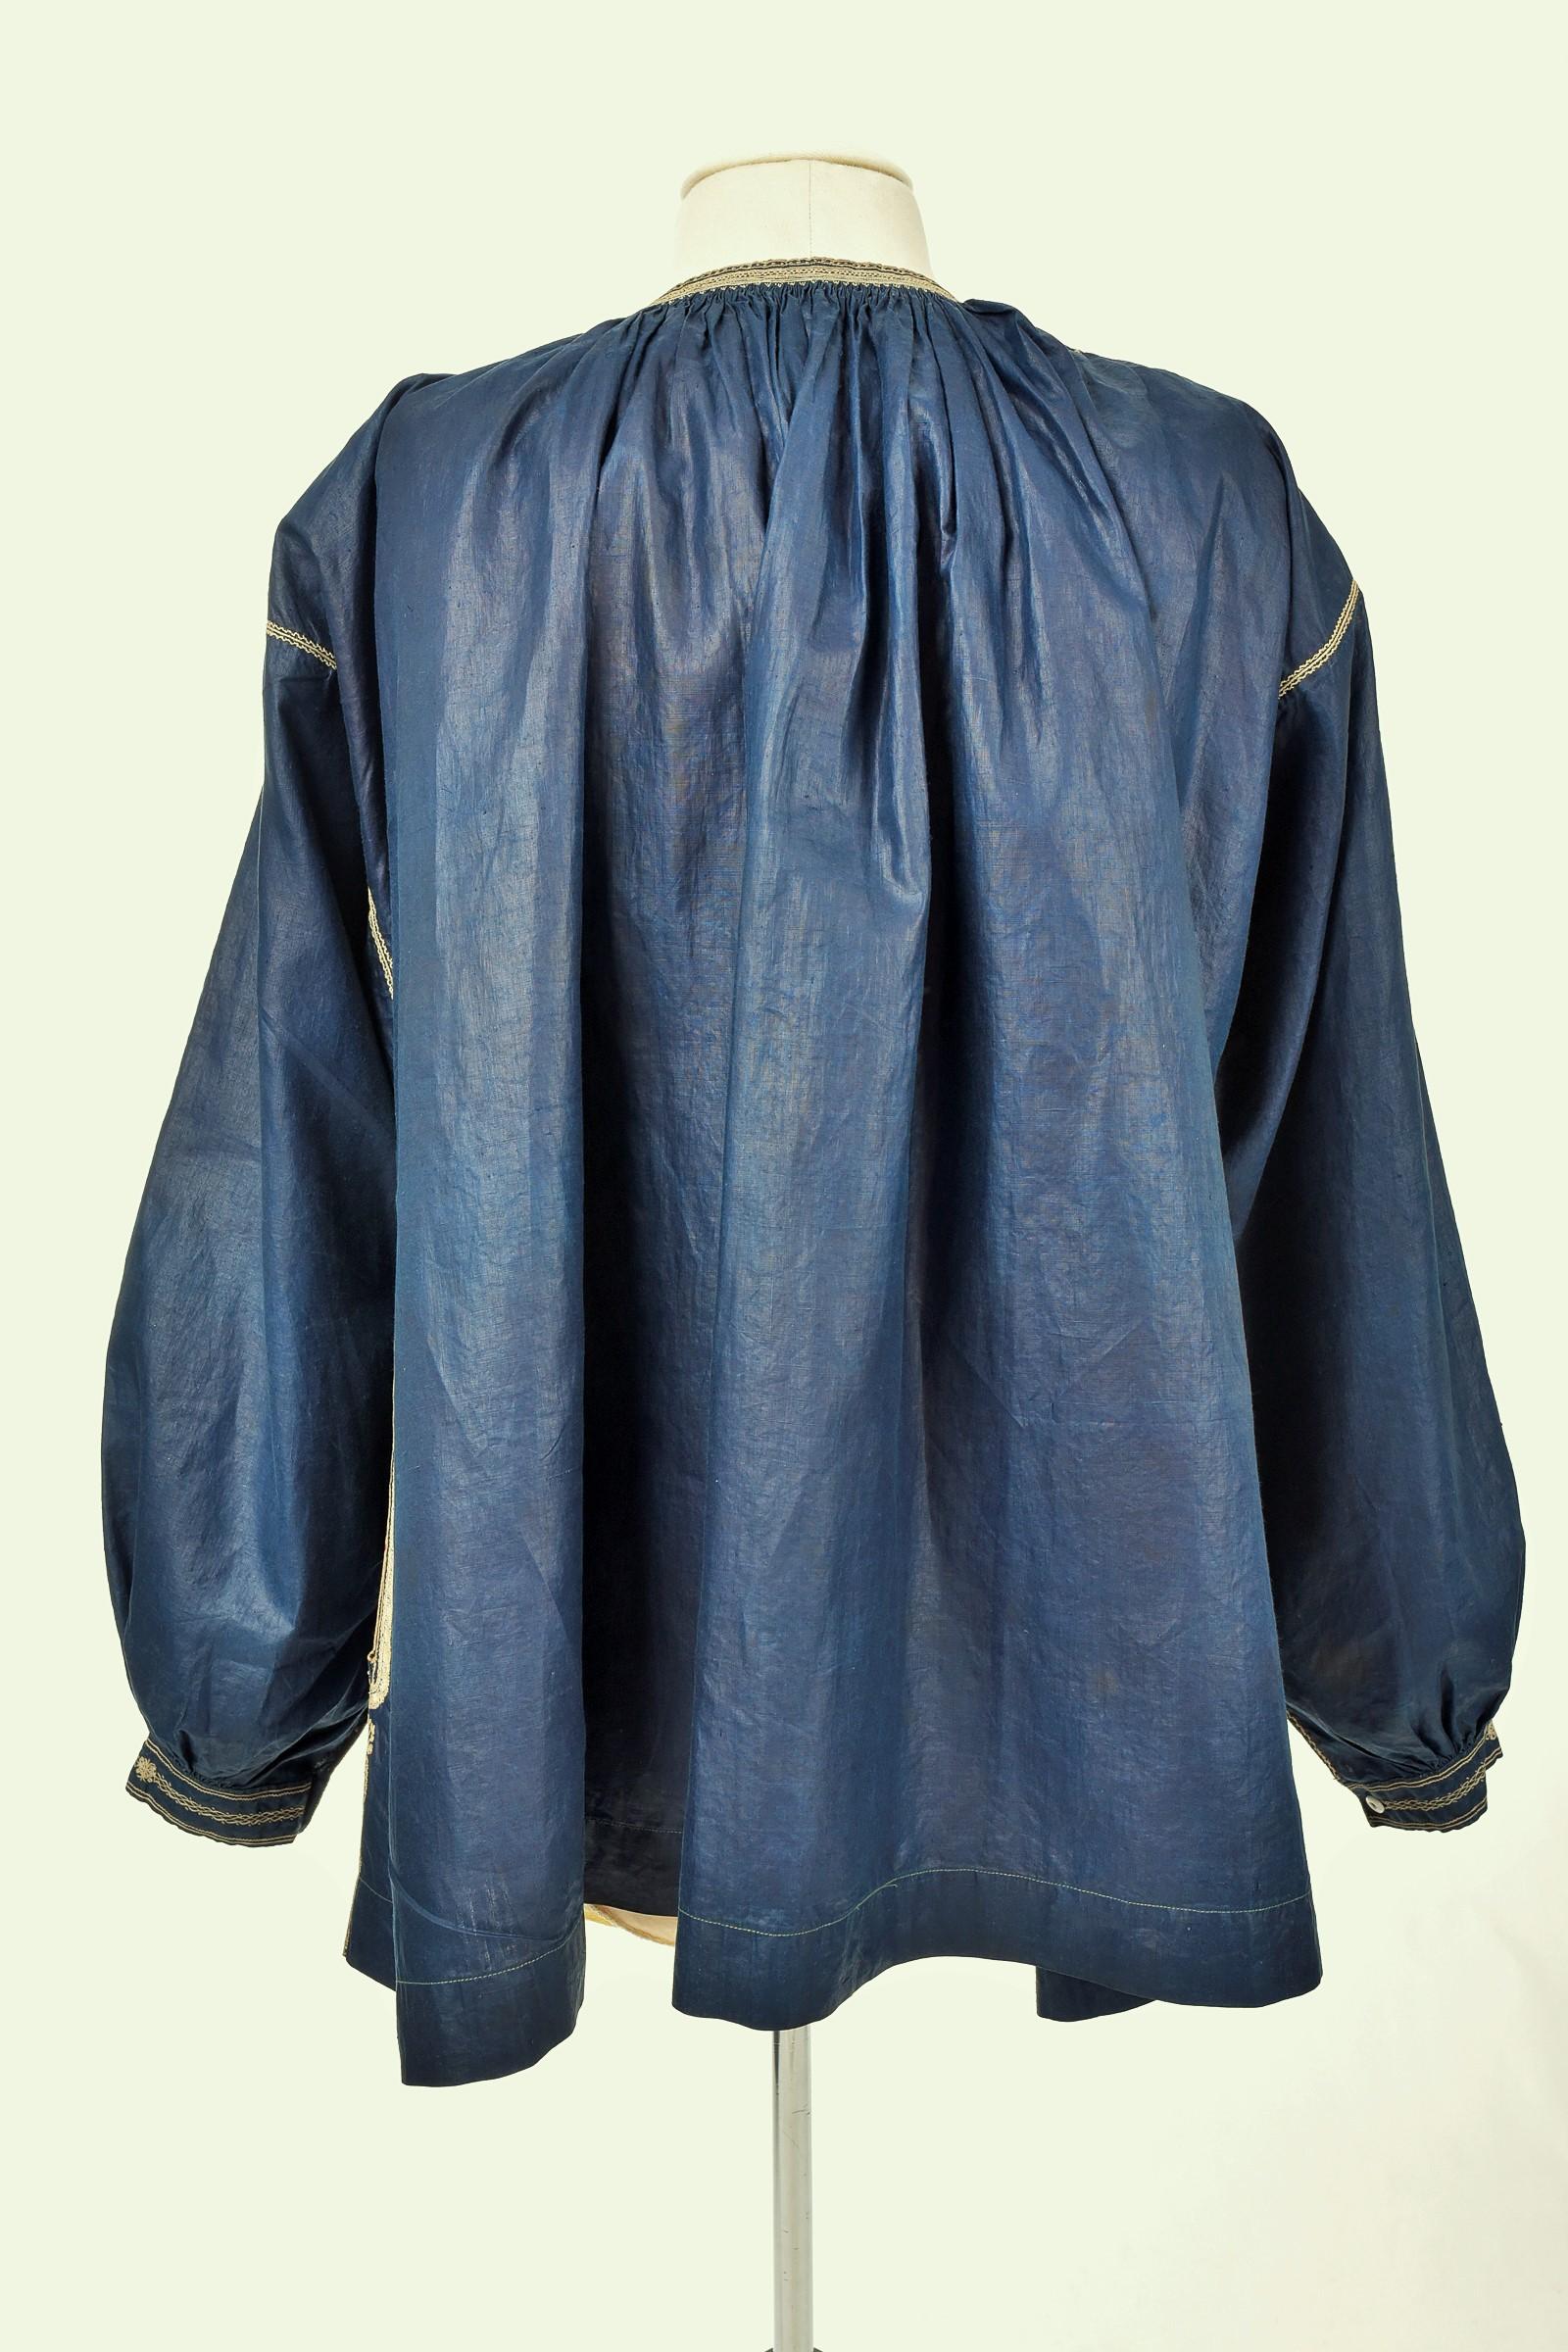 French Blaude or Peasant Blouse In Glazed Linen Dyed Indigo -French 19th Century For Sale 6